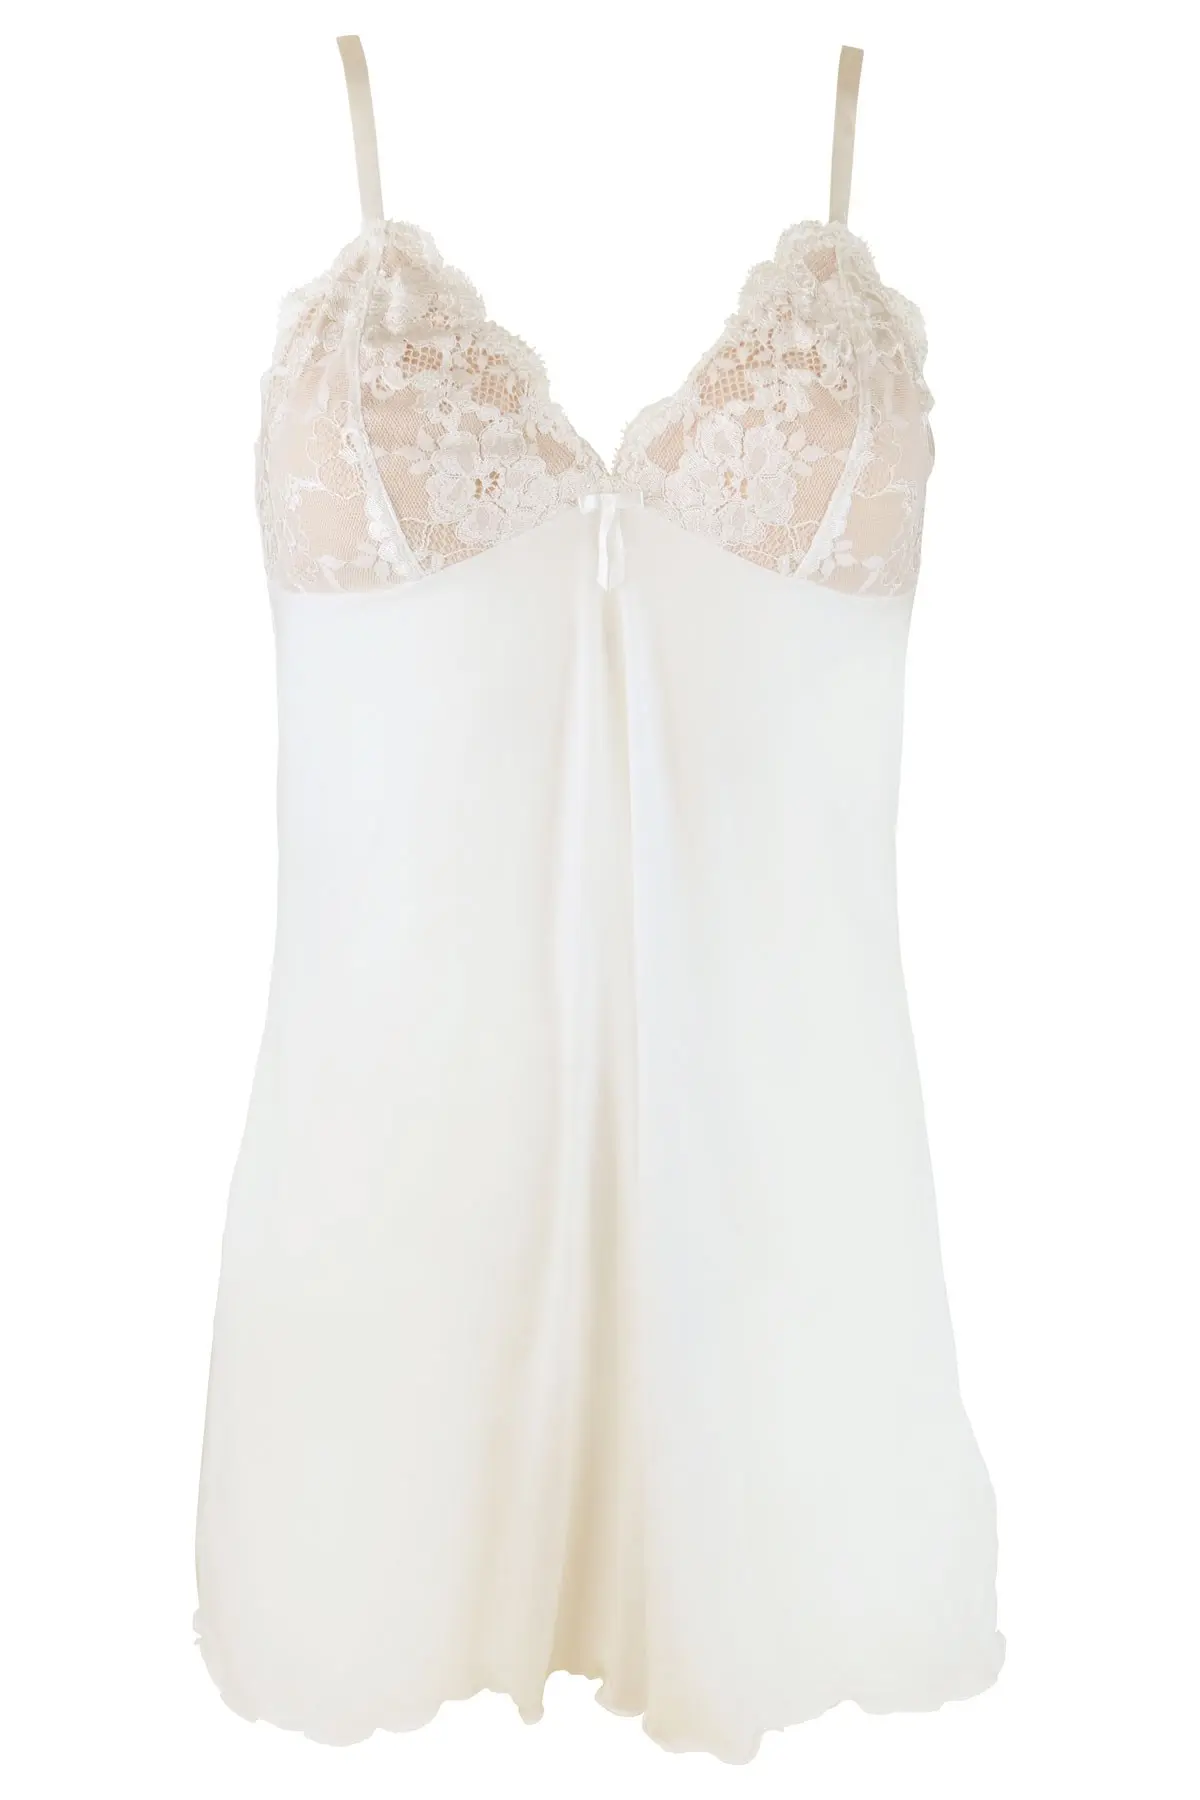 Amour Luxe Lace Chemise in Ivory/Champagne | Pour Moi